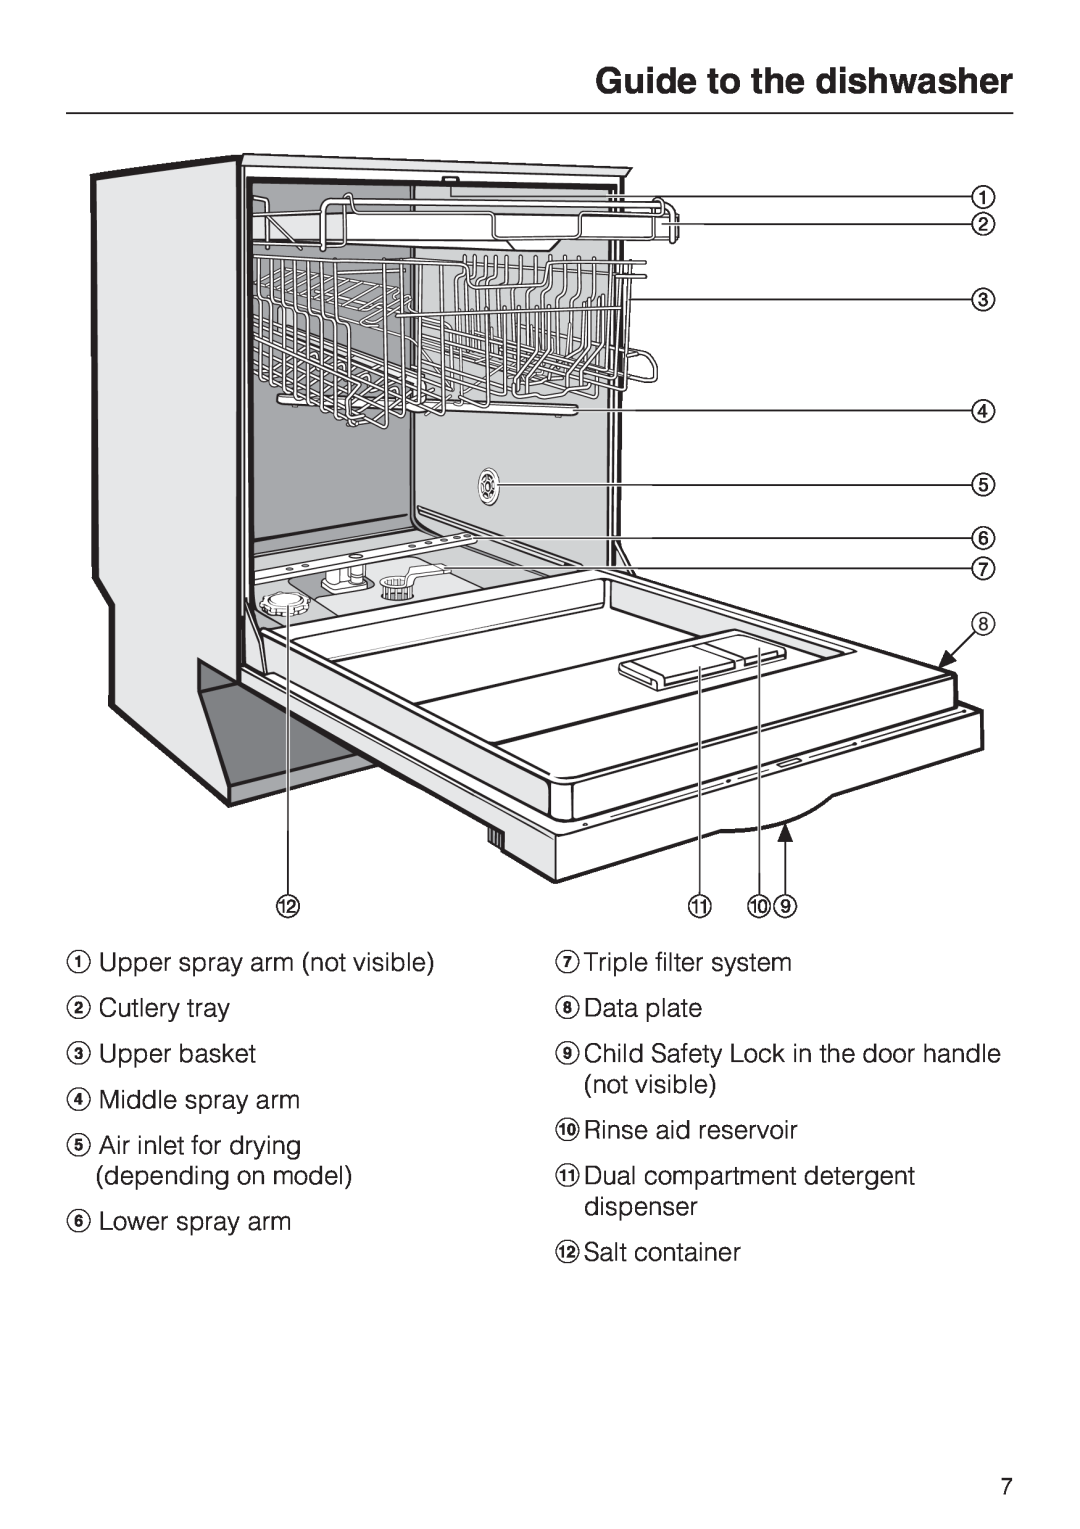 Miele G 2432 manual Guide to the dishwasher, Upper spray arm not visible Cutlery tray, Upper basket Middle spray arm 